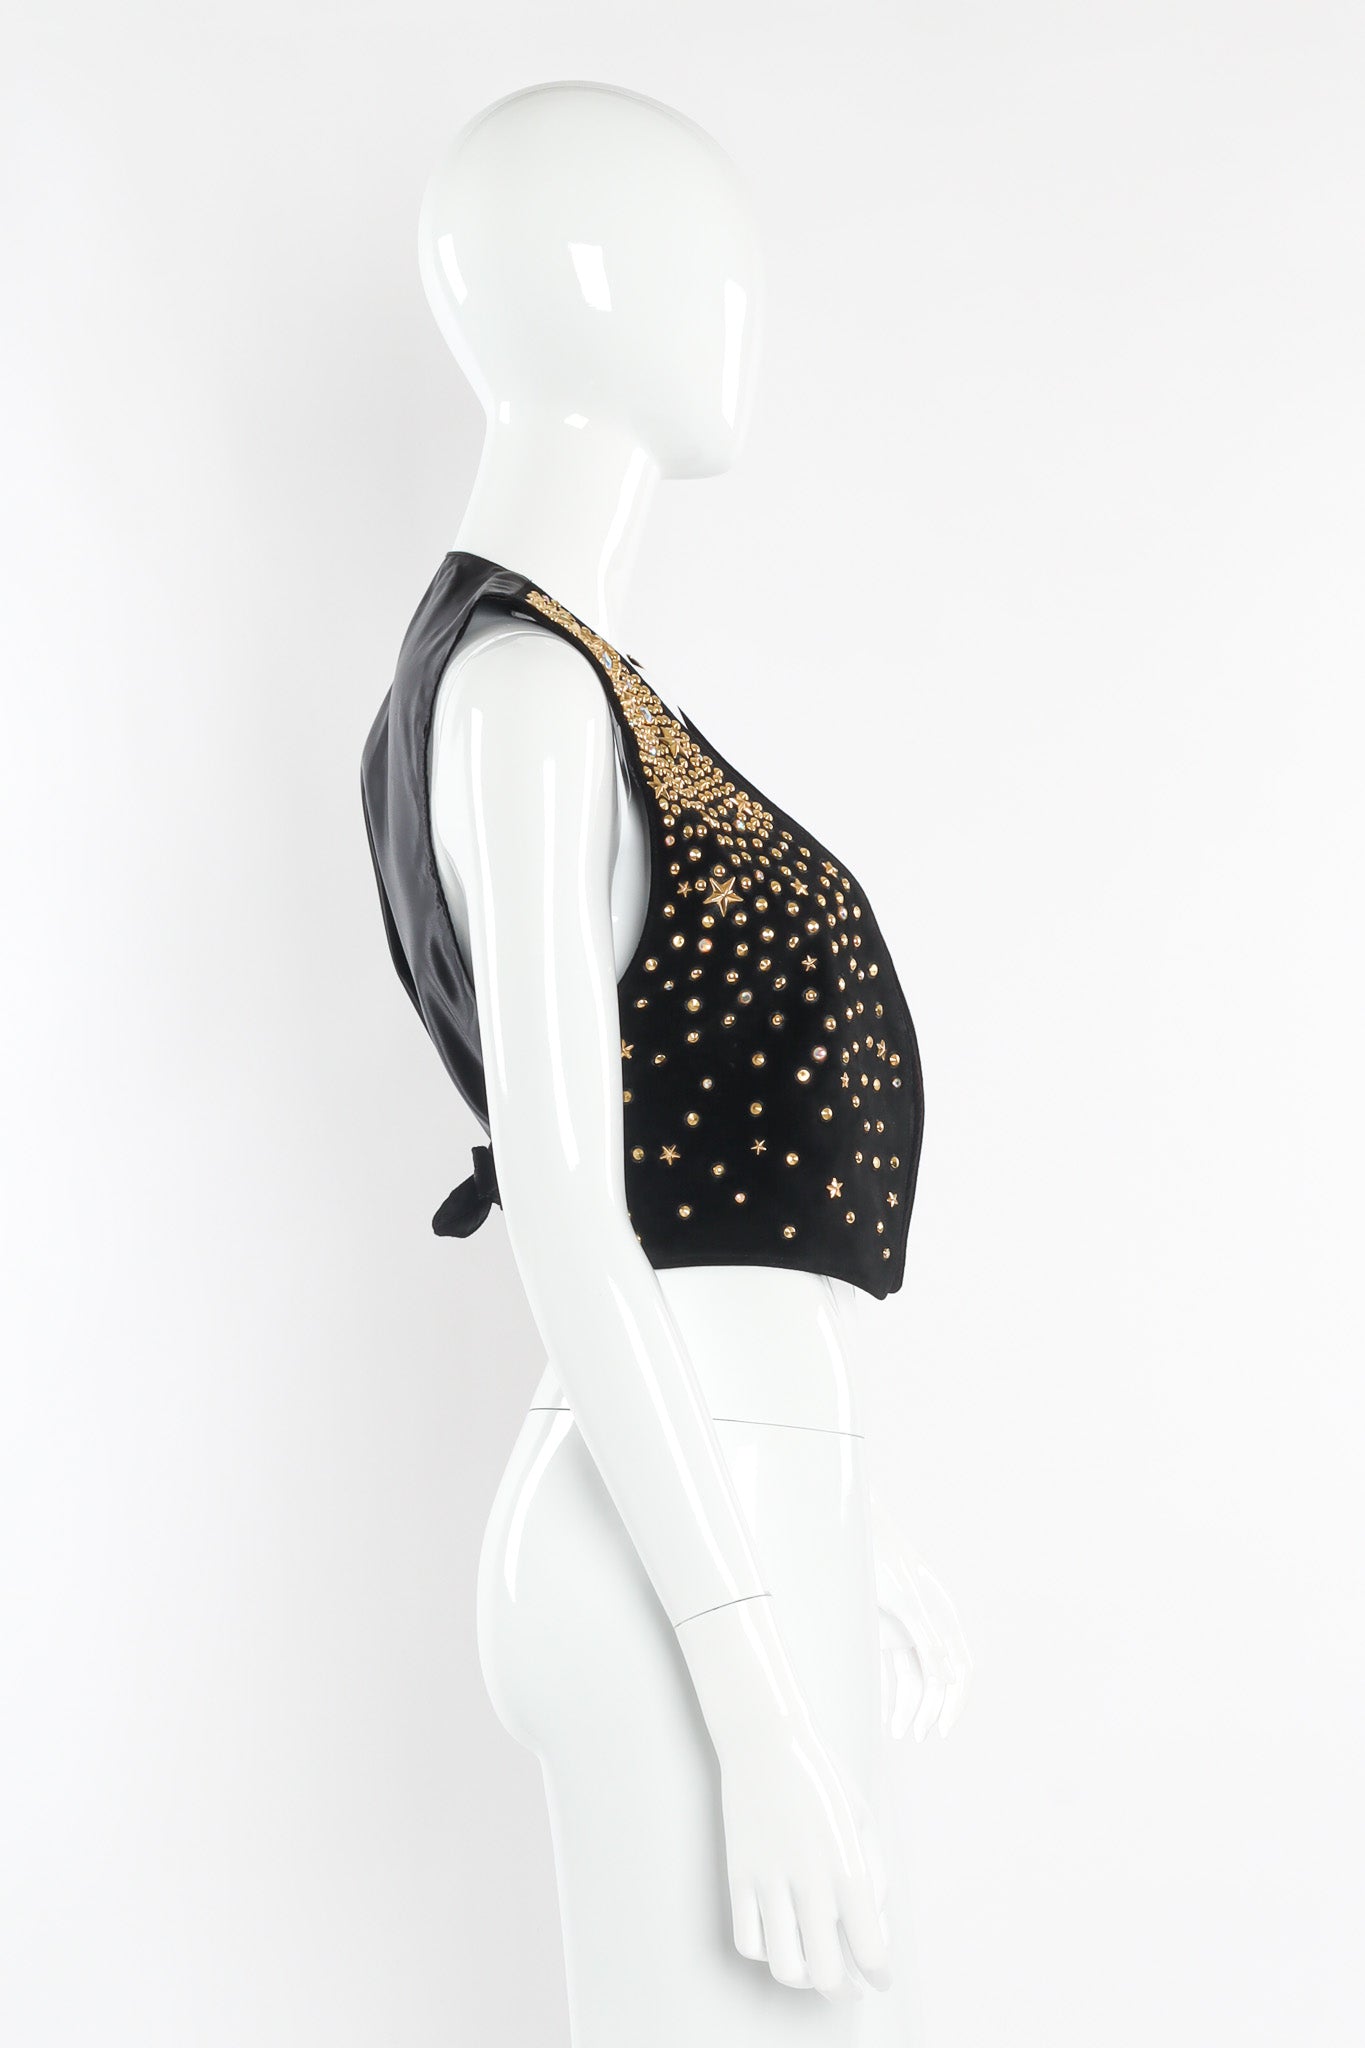 Leather vest with eclectic star and opalescent studs by K. Baumann side mannequin view photo @recessla